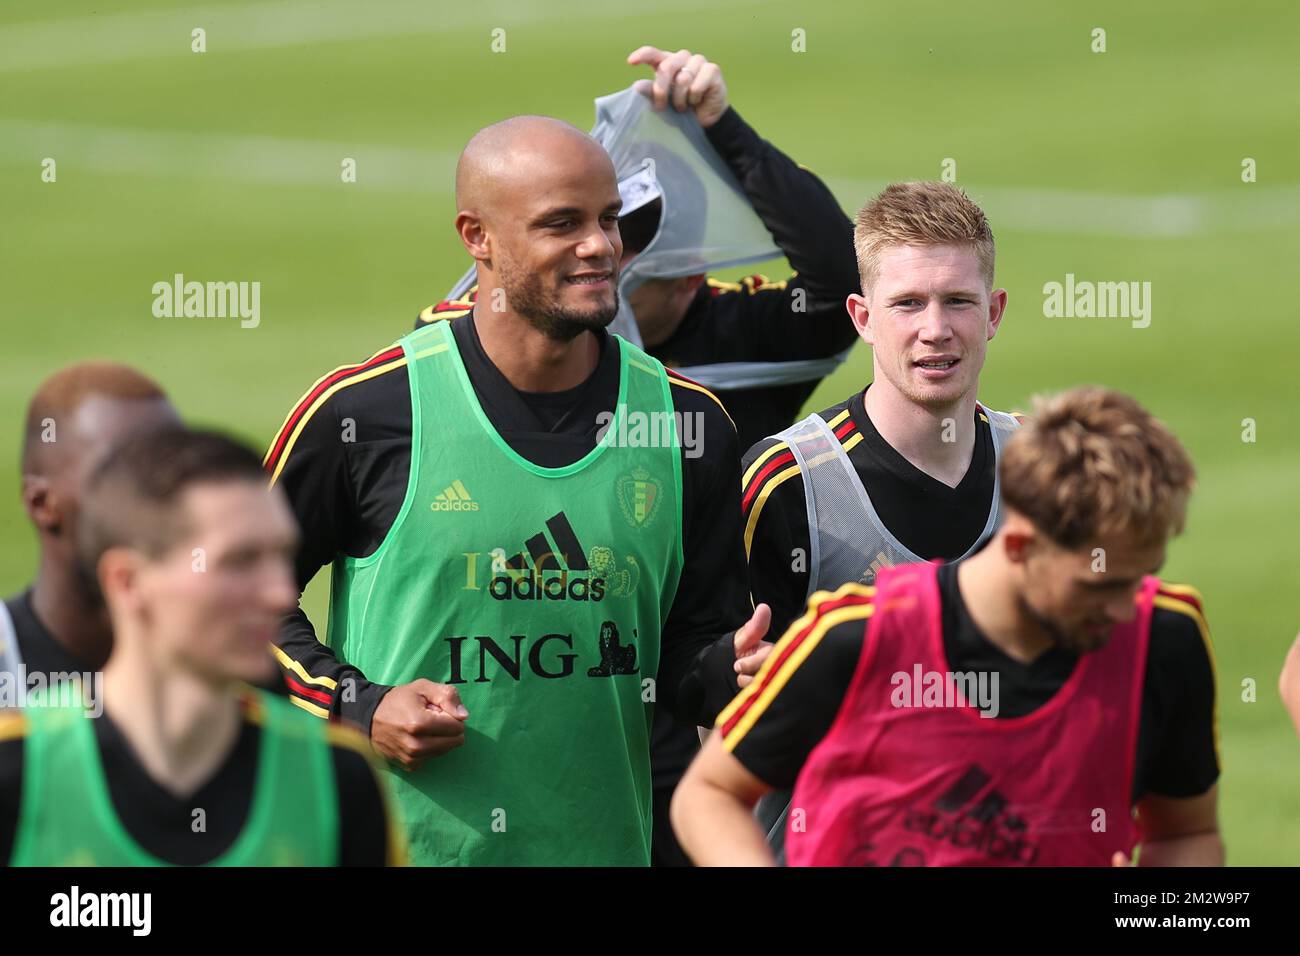 Belgium's Vincent Kompany and Belgium's Kevin De Bruyne pictured during a training session of Belgian national soccer team the Red Devils, Tuesday 04 June 2019. The team will be playing two European Cup 2020 qualification games against Kazachstan and Scotland in Belgium. BELGA PHOTO BRUNO FAHY Stock Photo